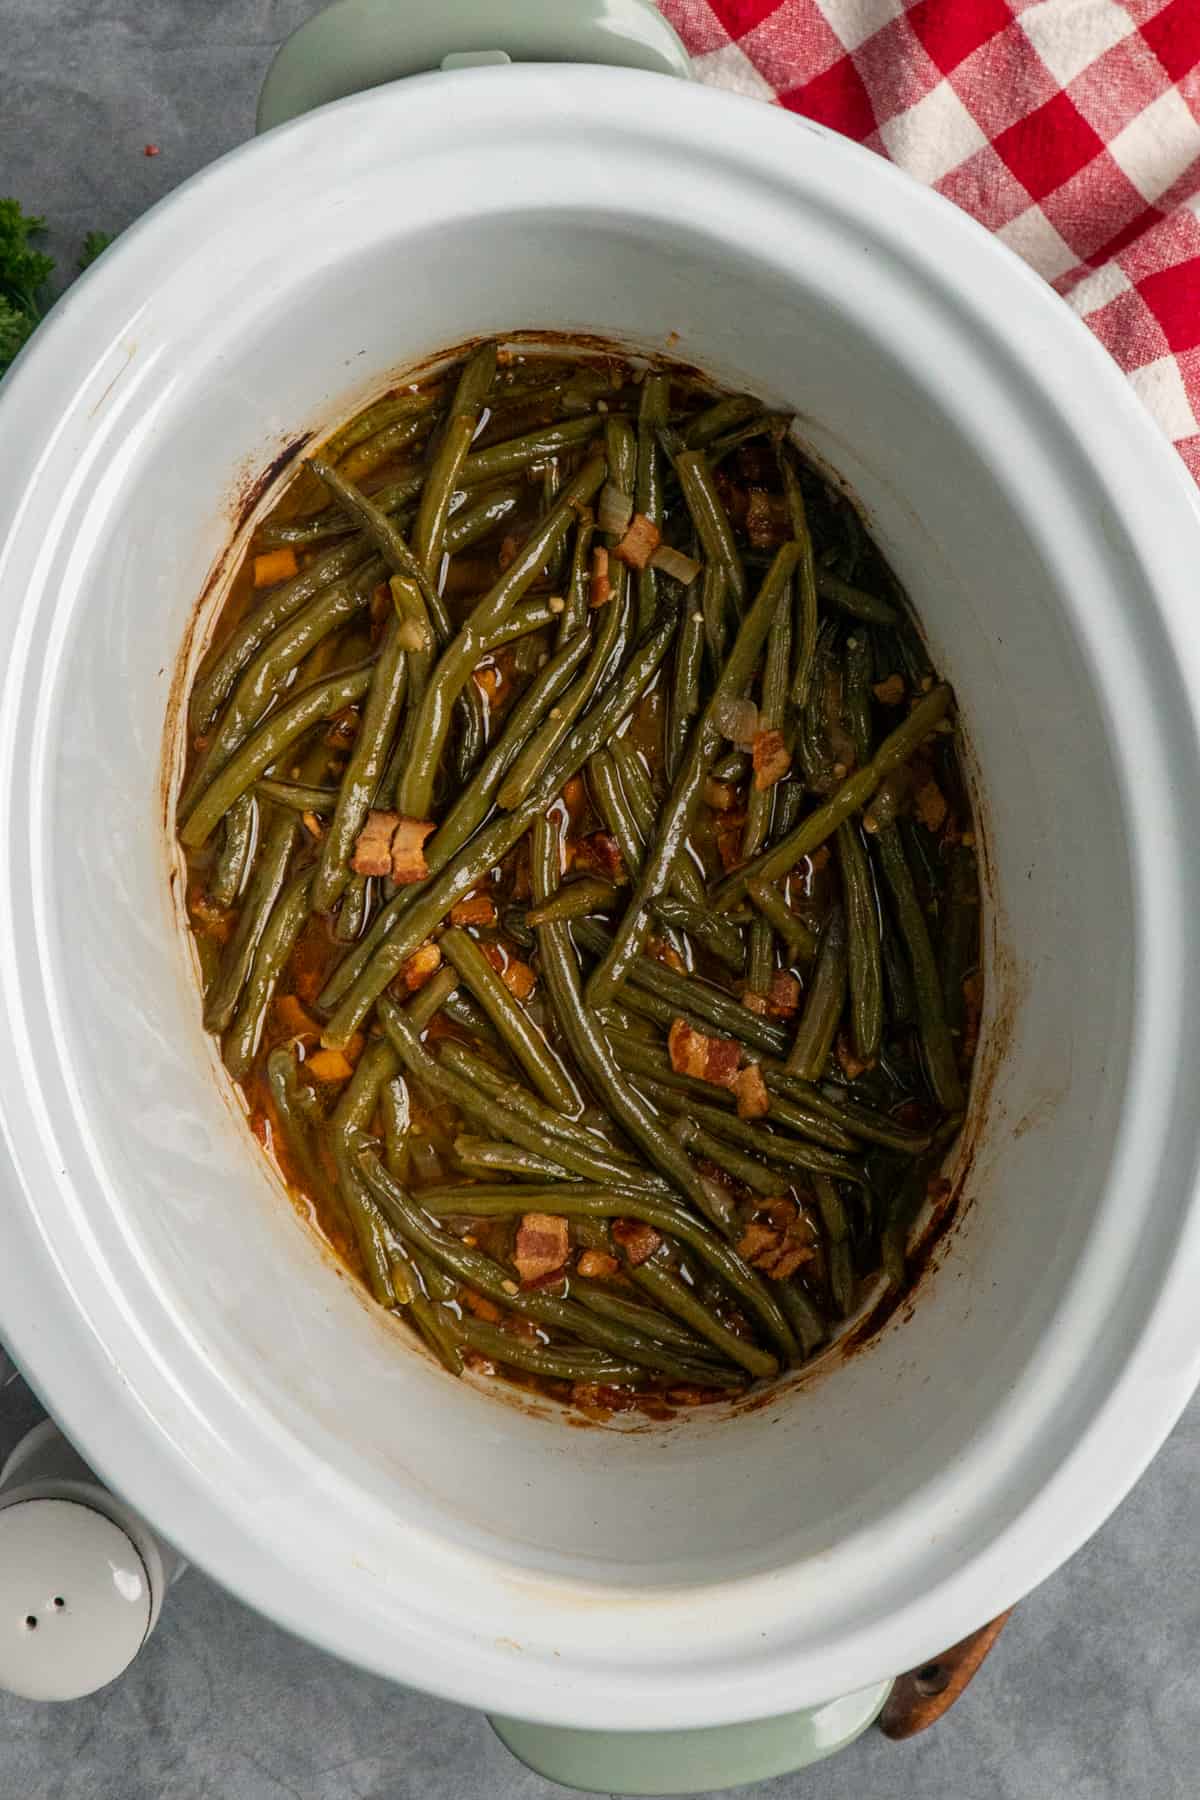 Overhead look at green beans in a crock pot.